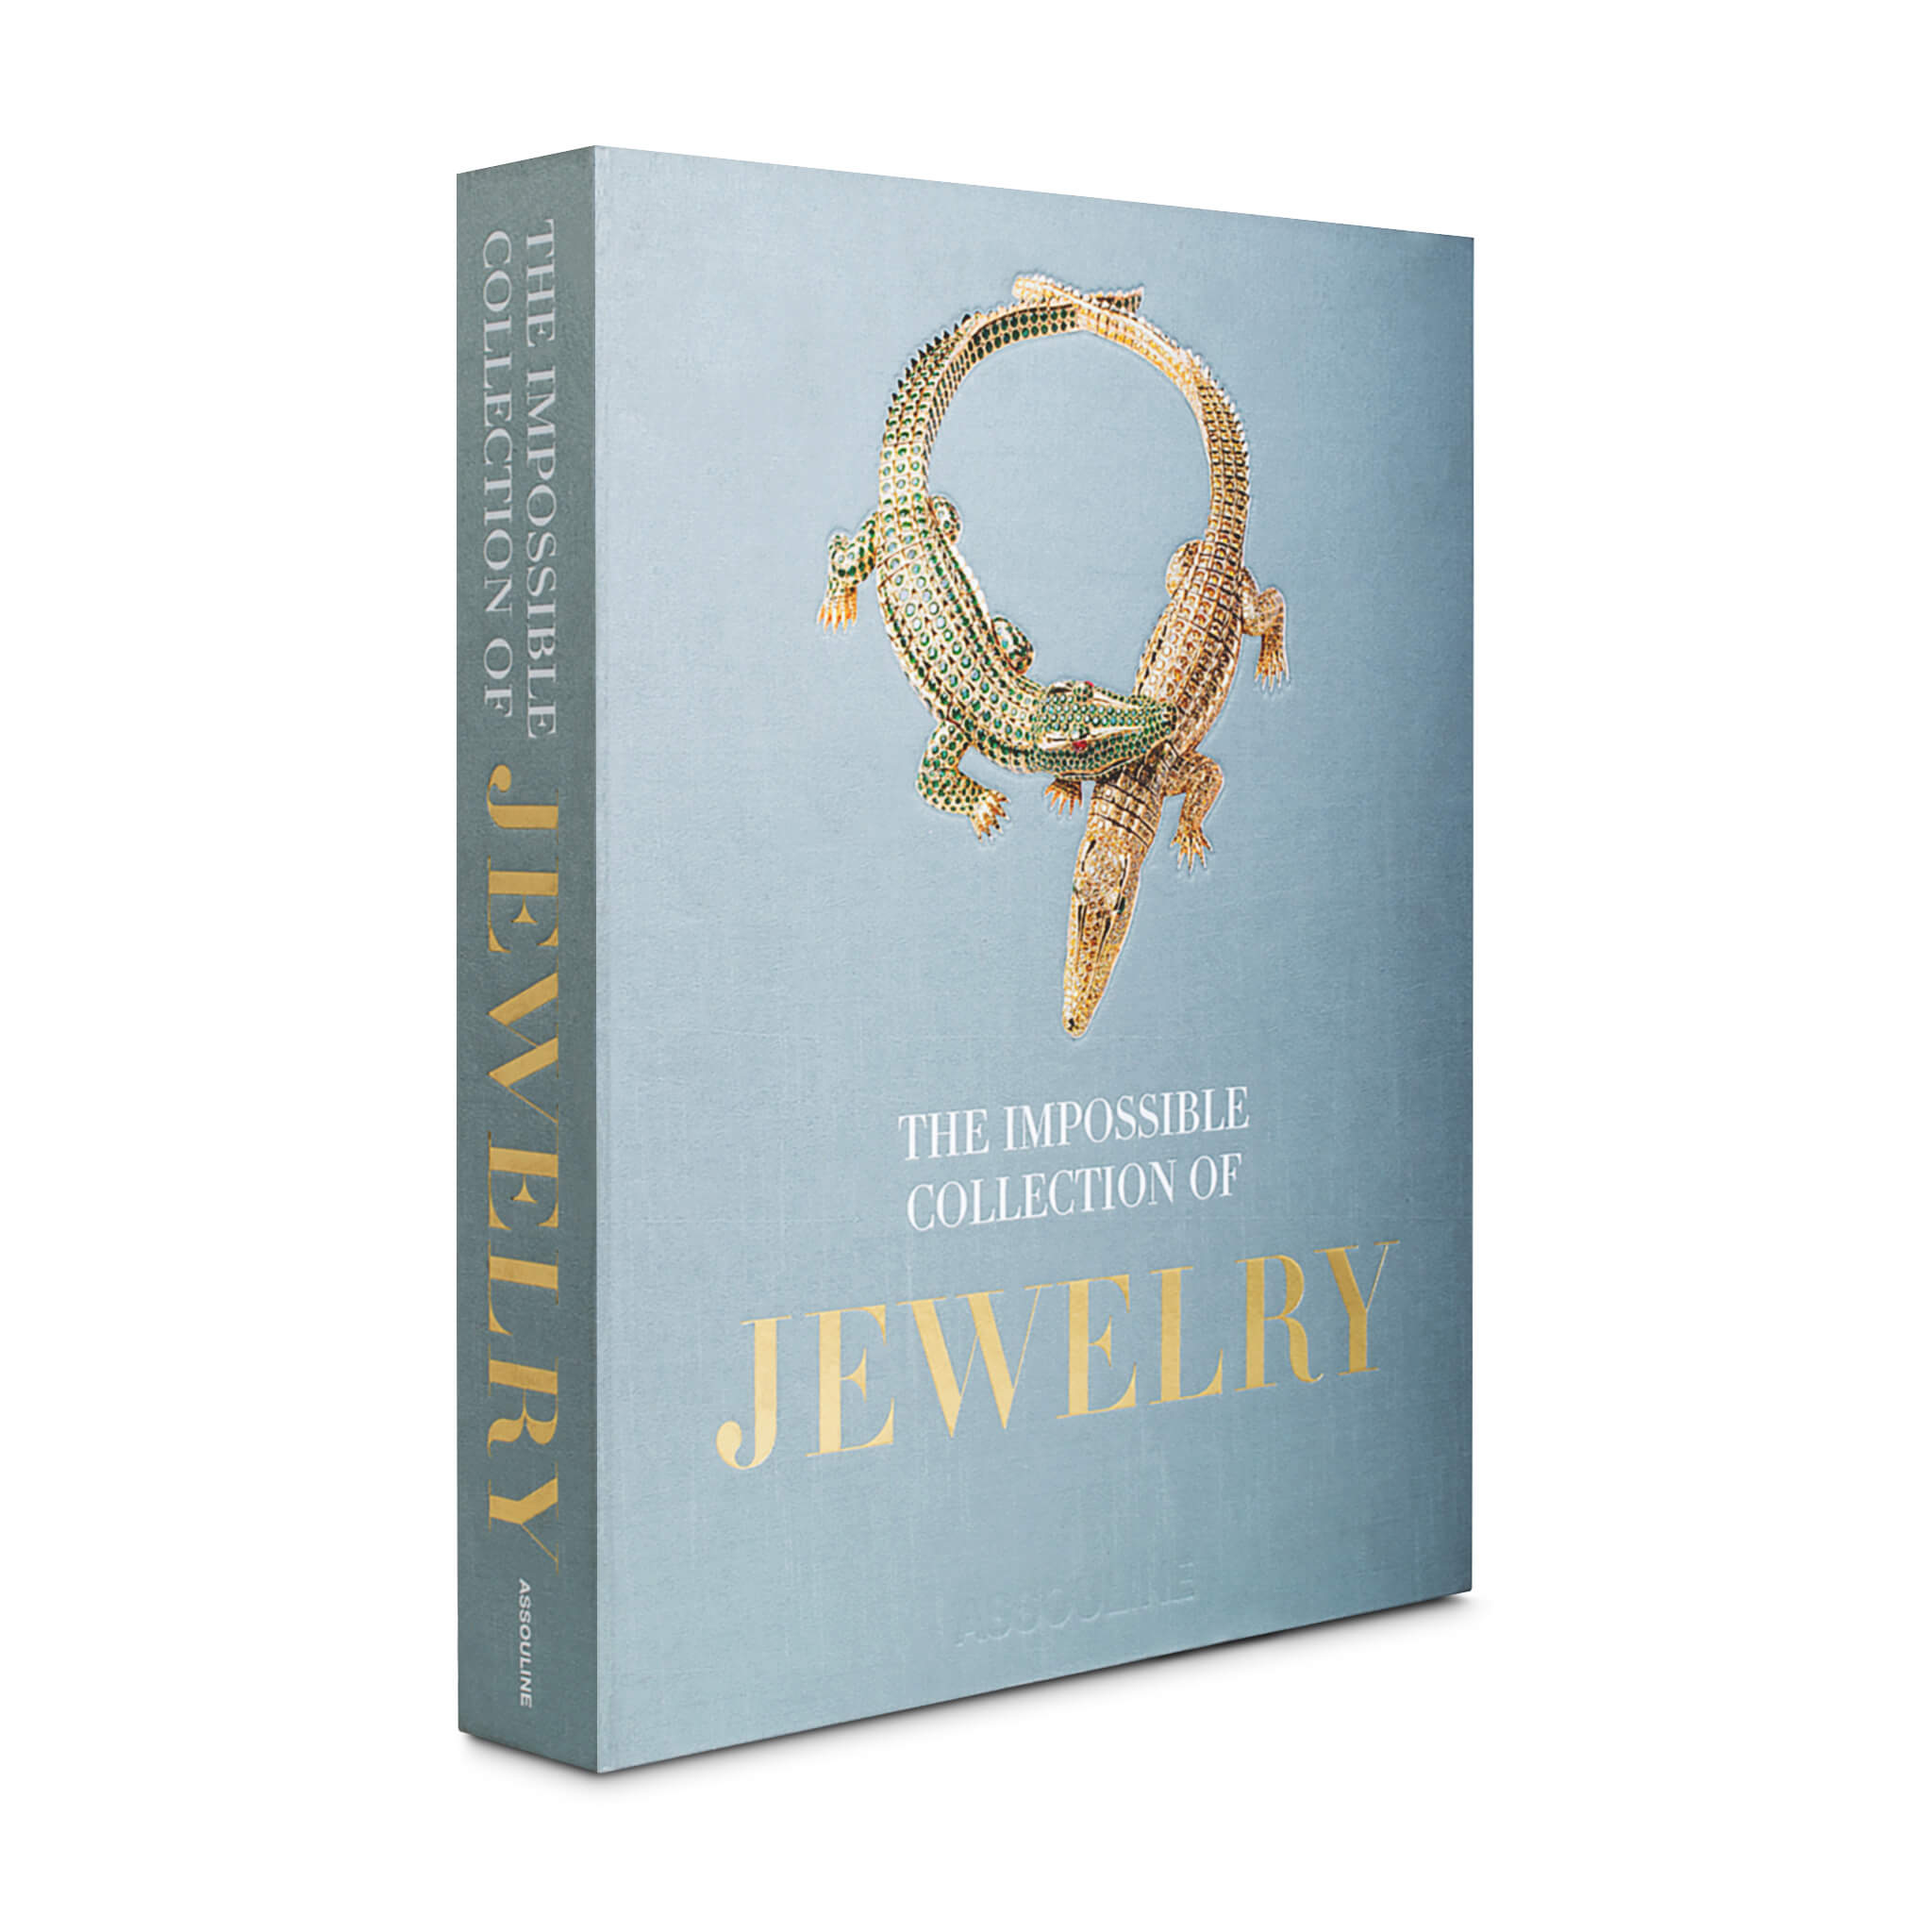 The Impossible Collection of Jewellery